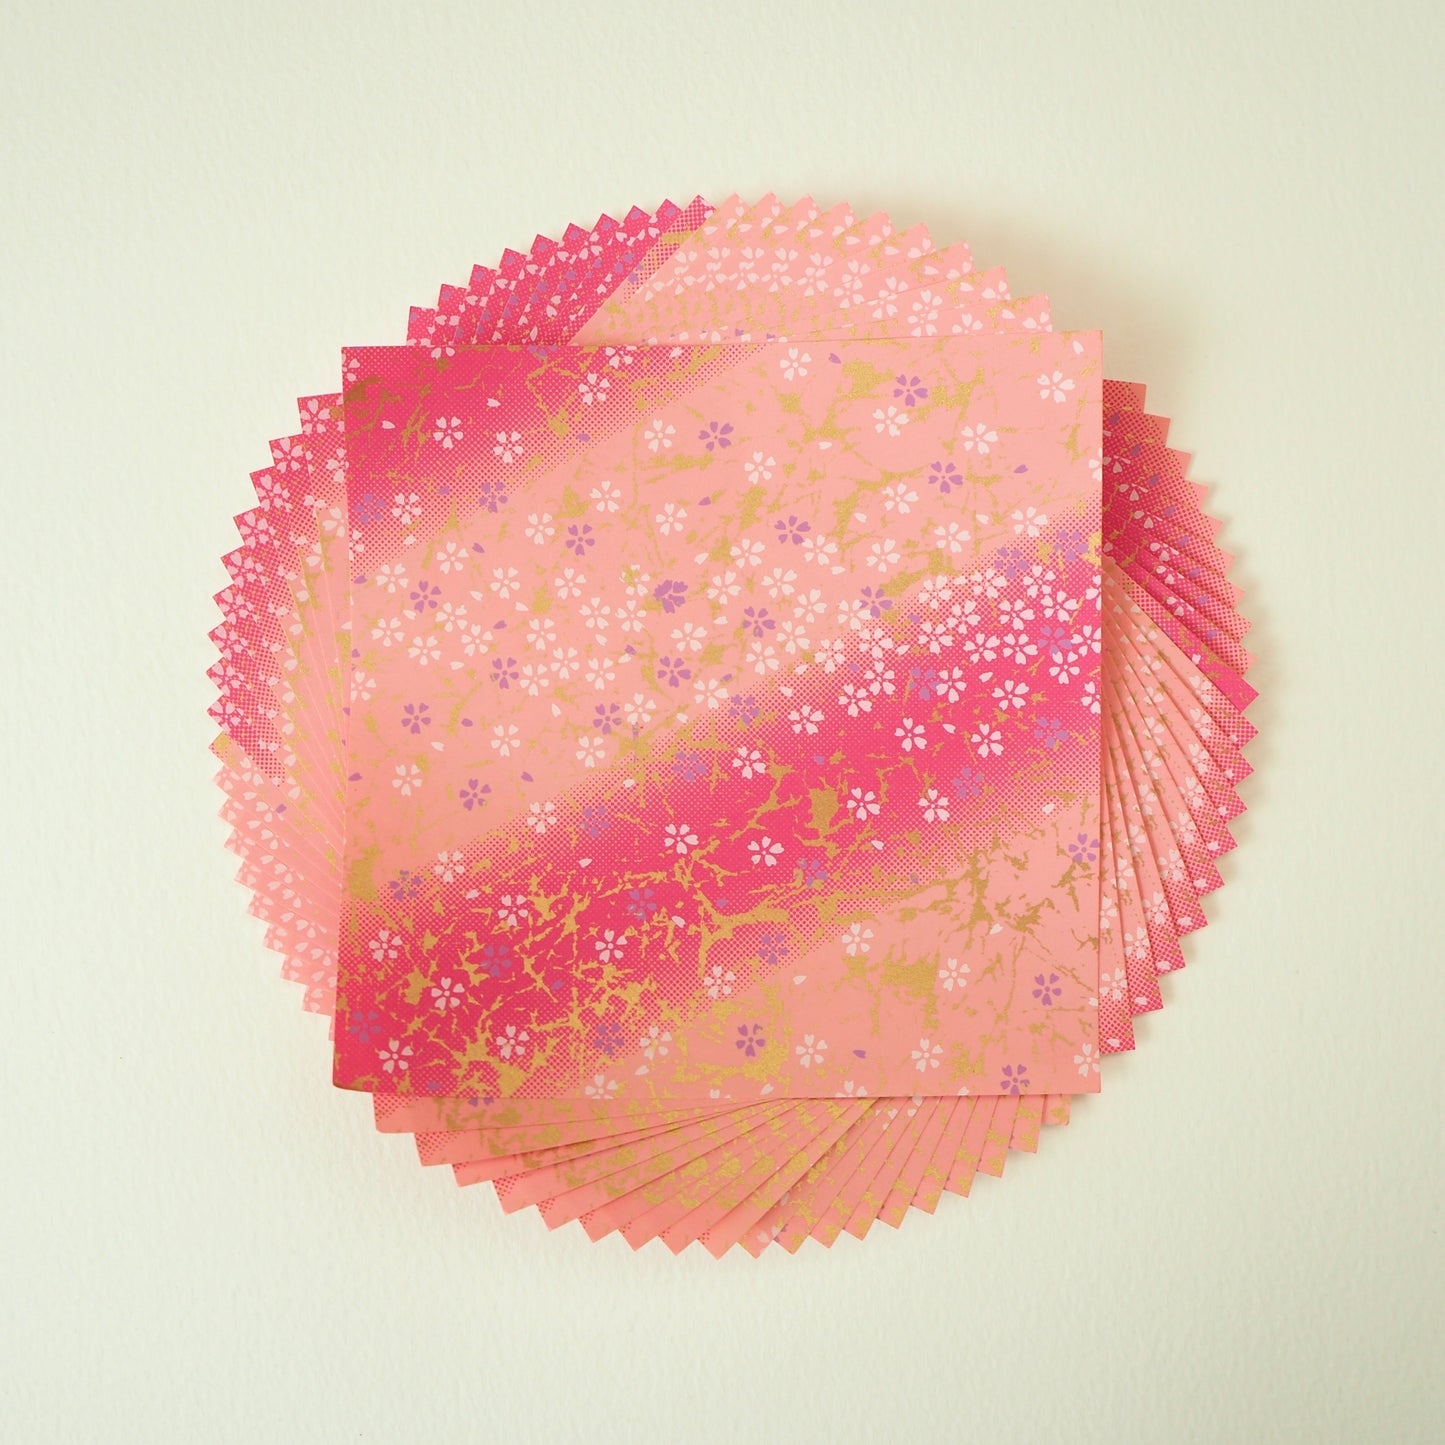 Pack of 20 Sheets 14x14cm Yuzen Washi Origami Paper HZ-340 - Small Cherry Blossom Pink Shade